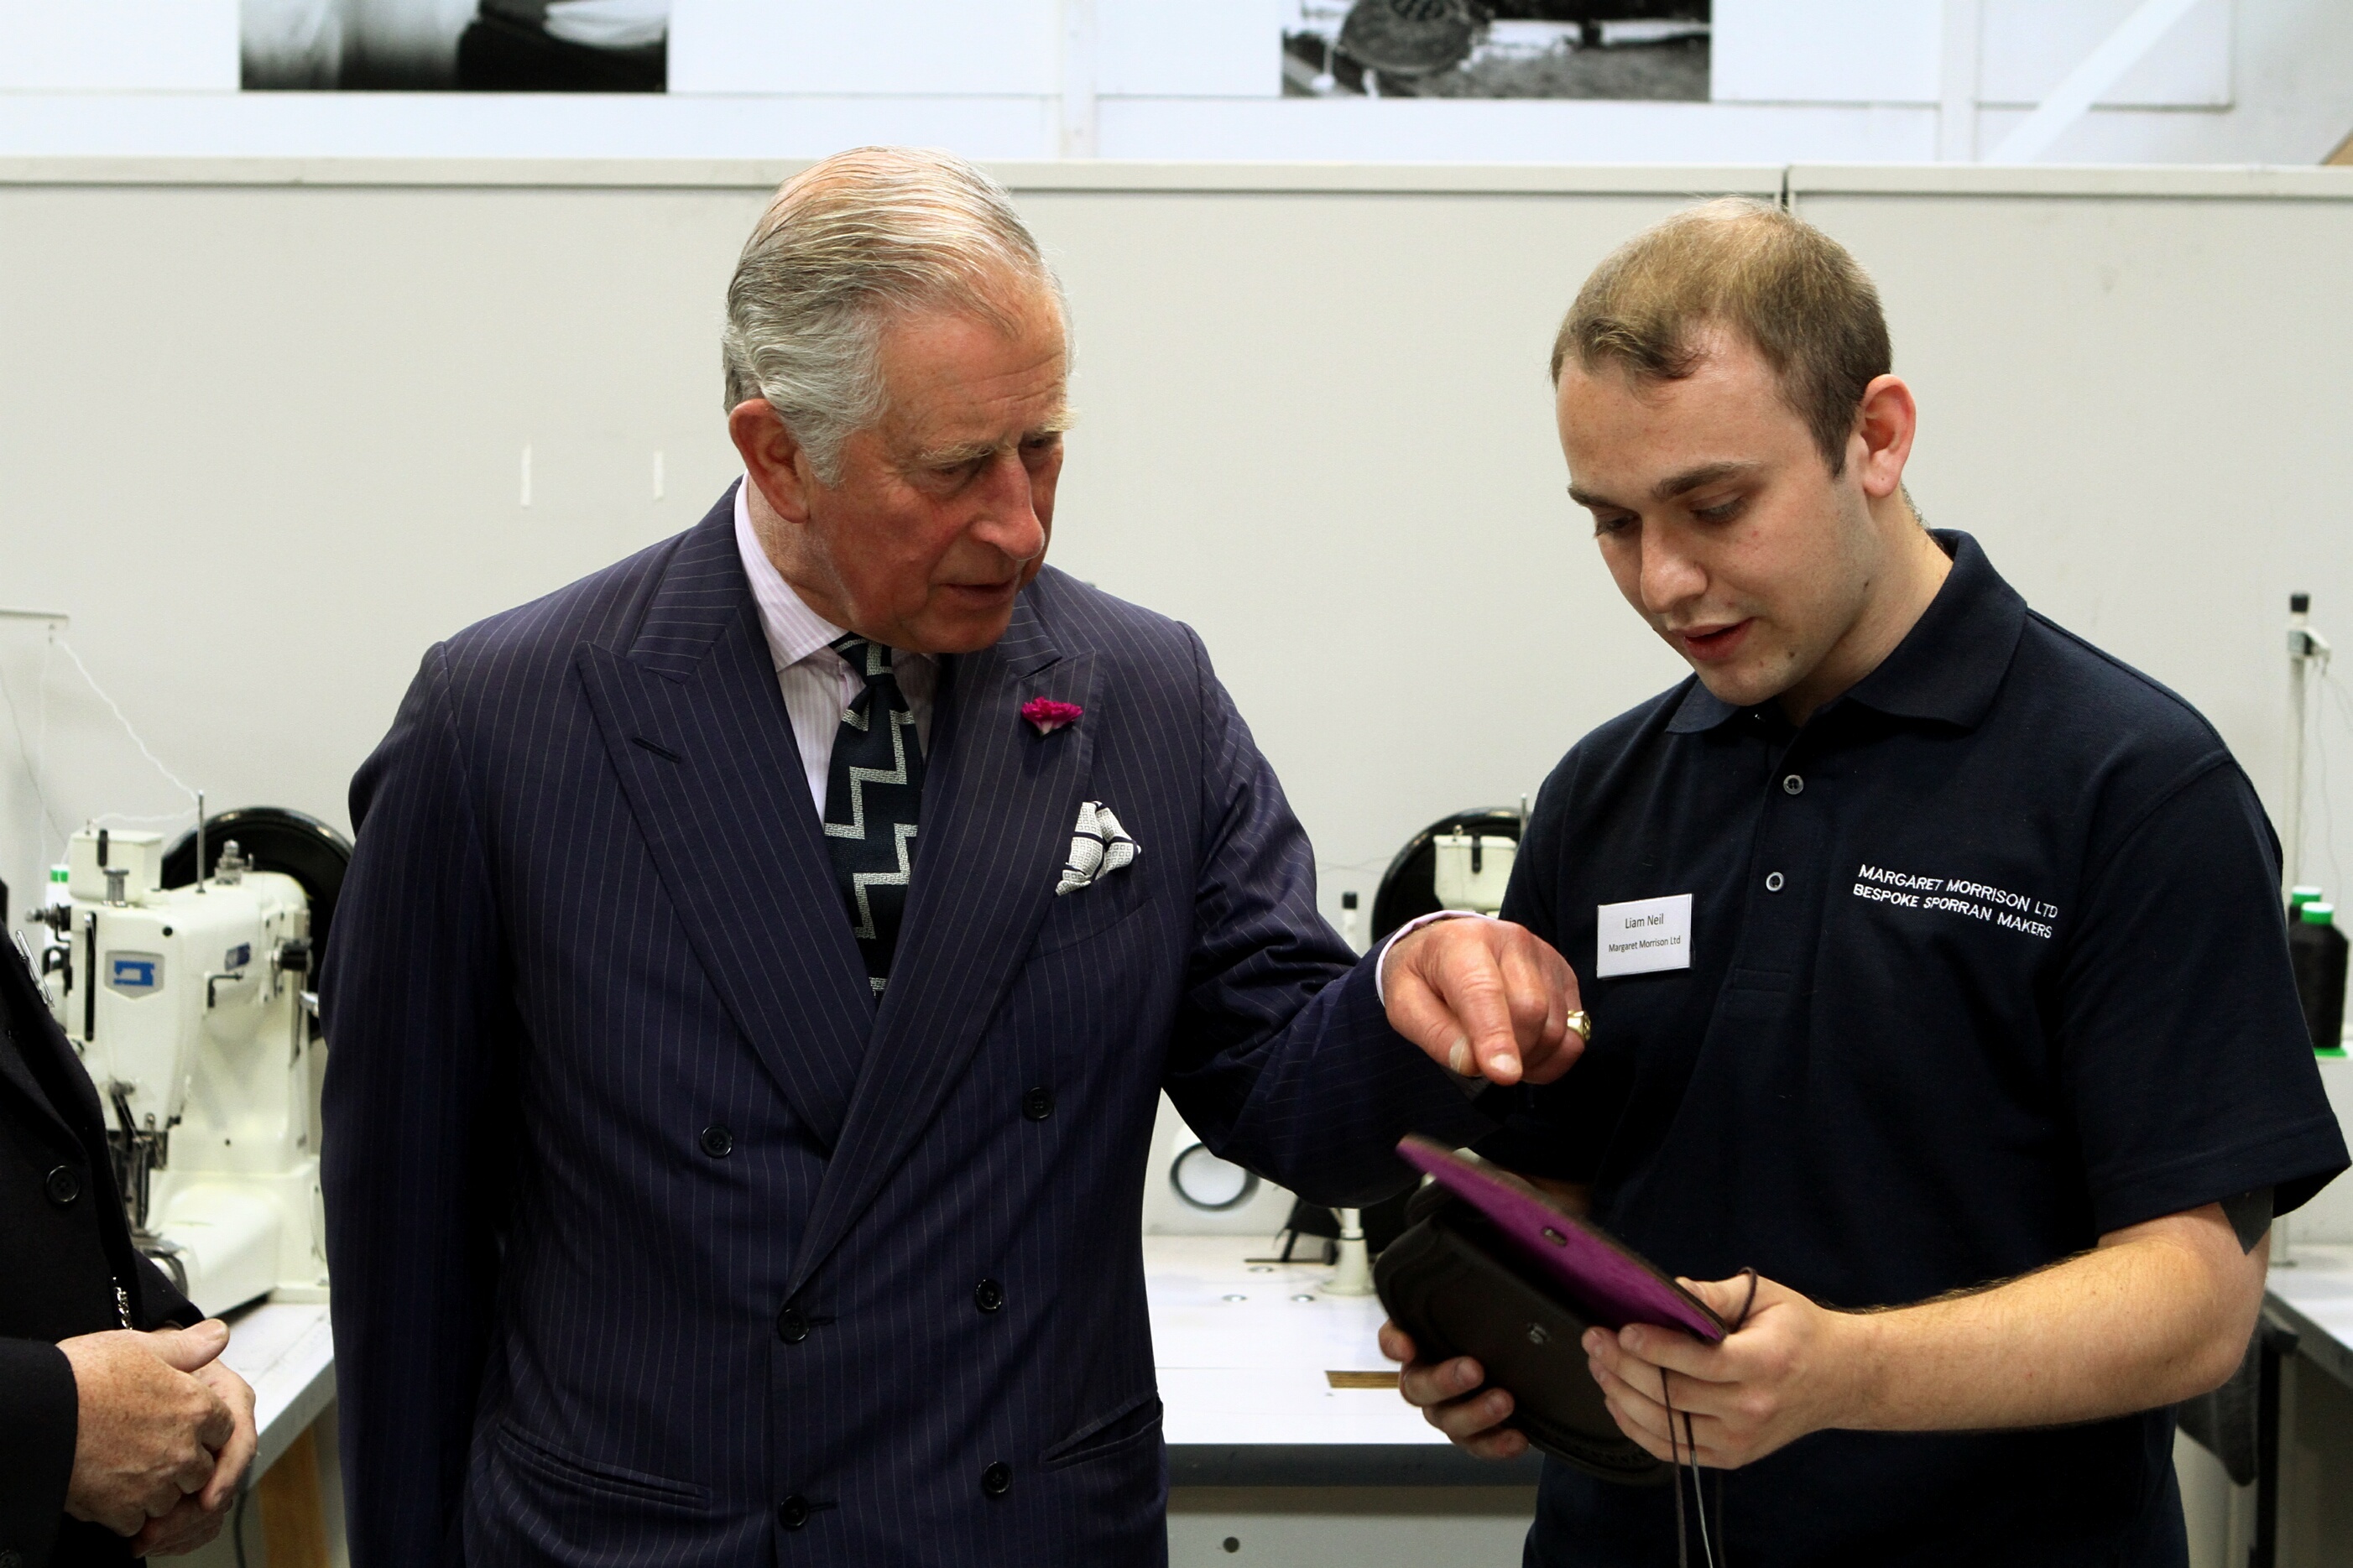 Liam Neil showing Prince Charles one of the sporrans in production.